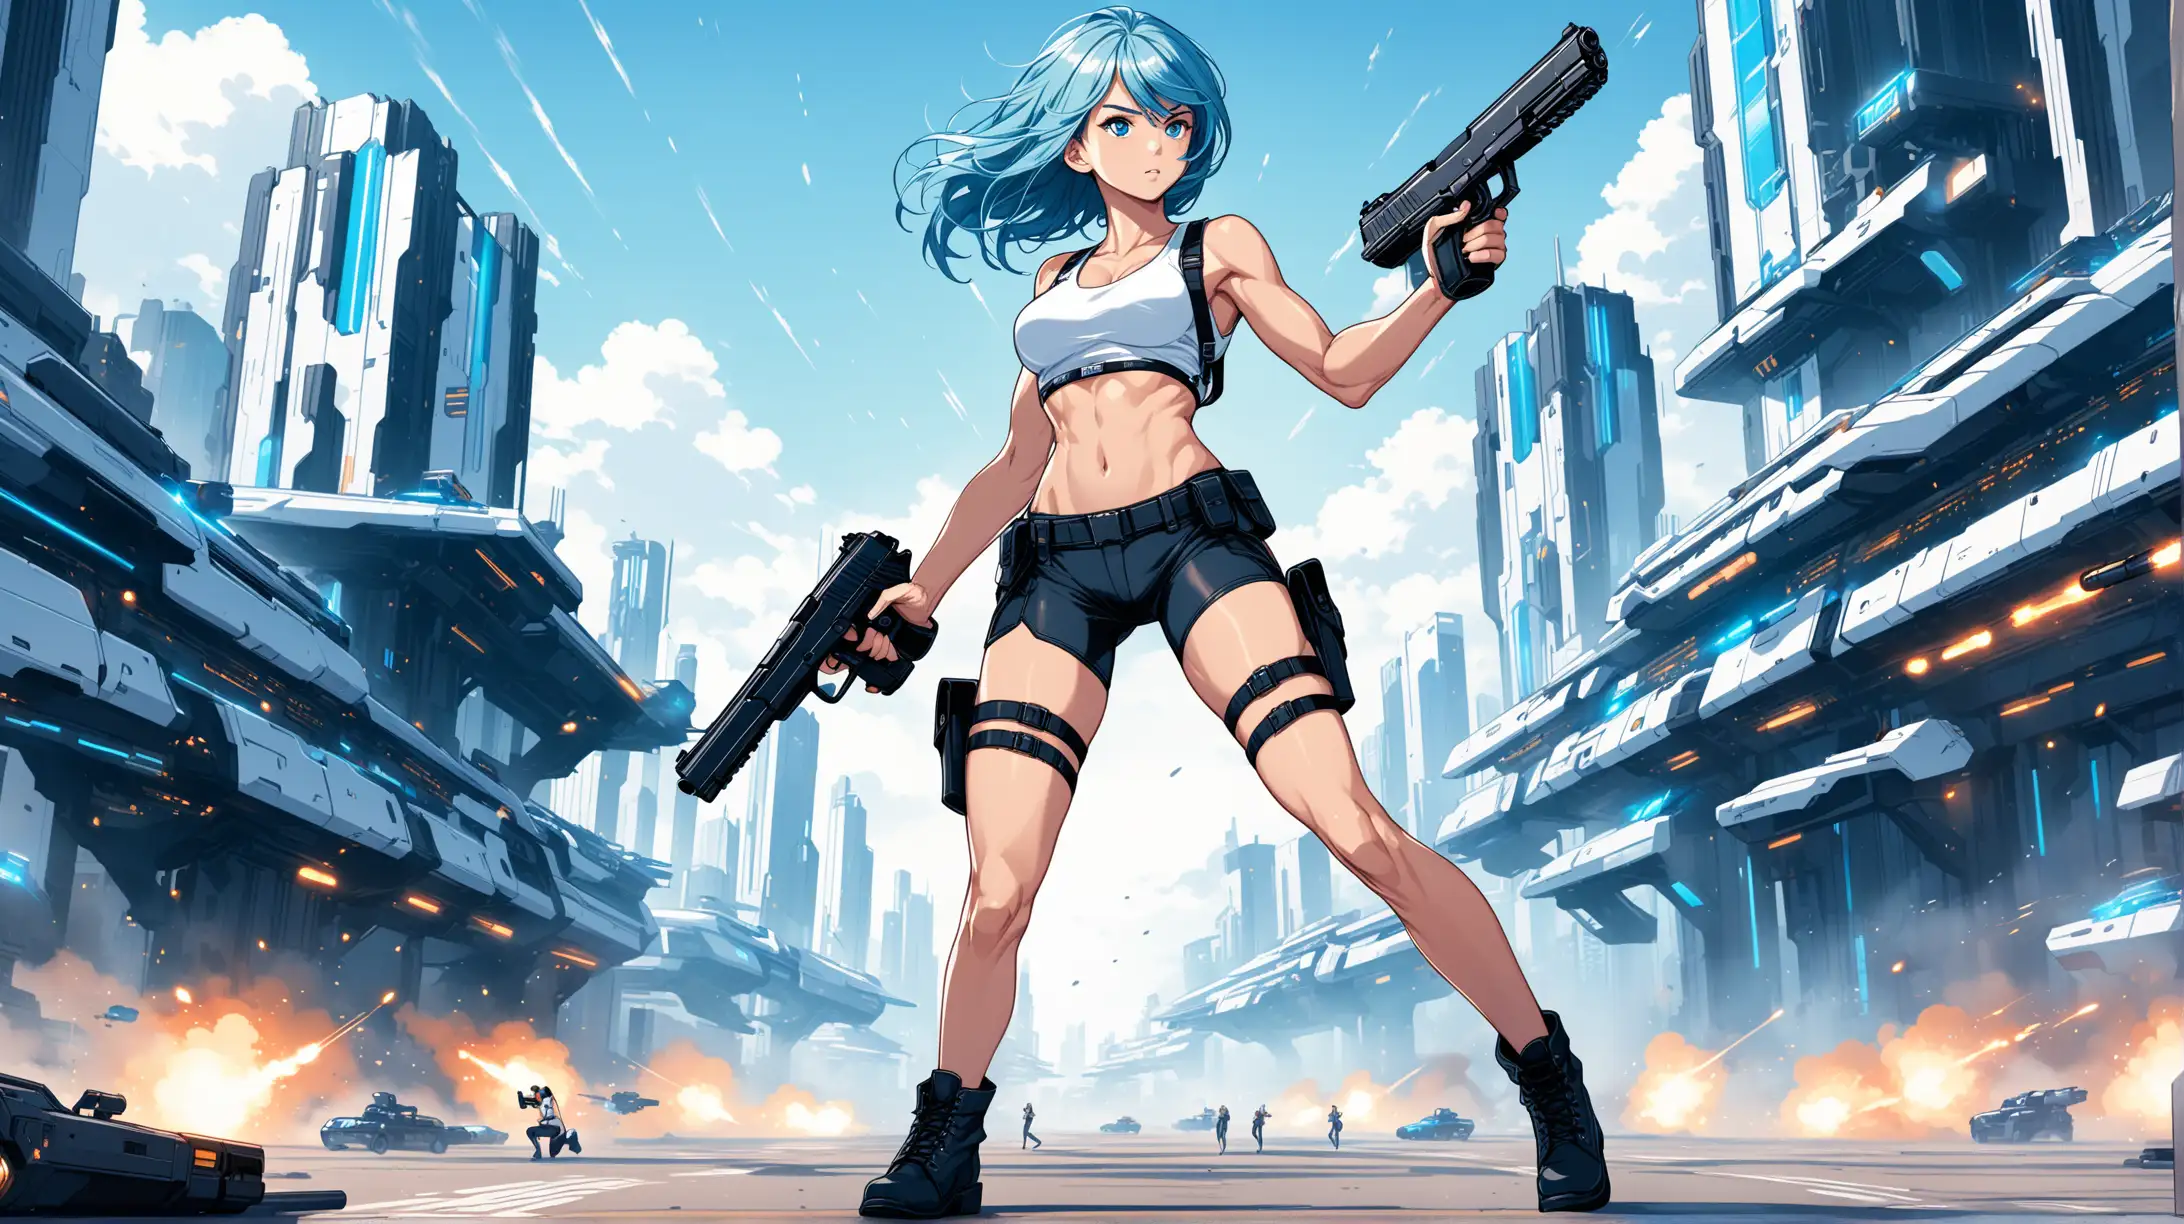 sexy fit 24 year old hero girl, short shaggy blue hair, blue eyes, firing handguns in futuristic town, super skinny toned body, short white tank top, sexy midriff, wearing suspenders, holsters on each thigh, combat boots, blue black white 3 color minimal design